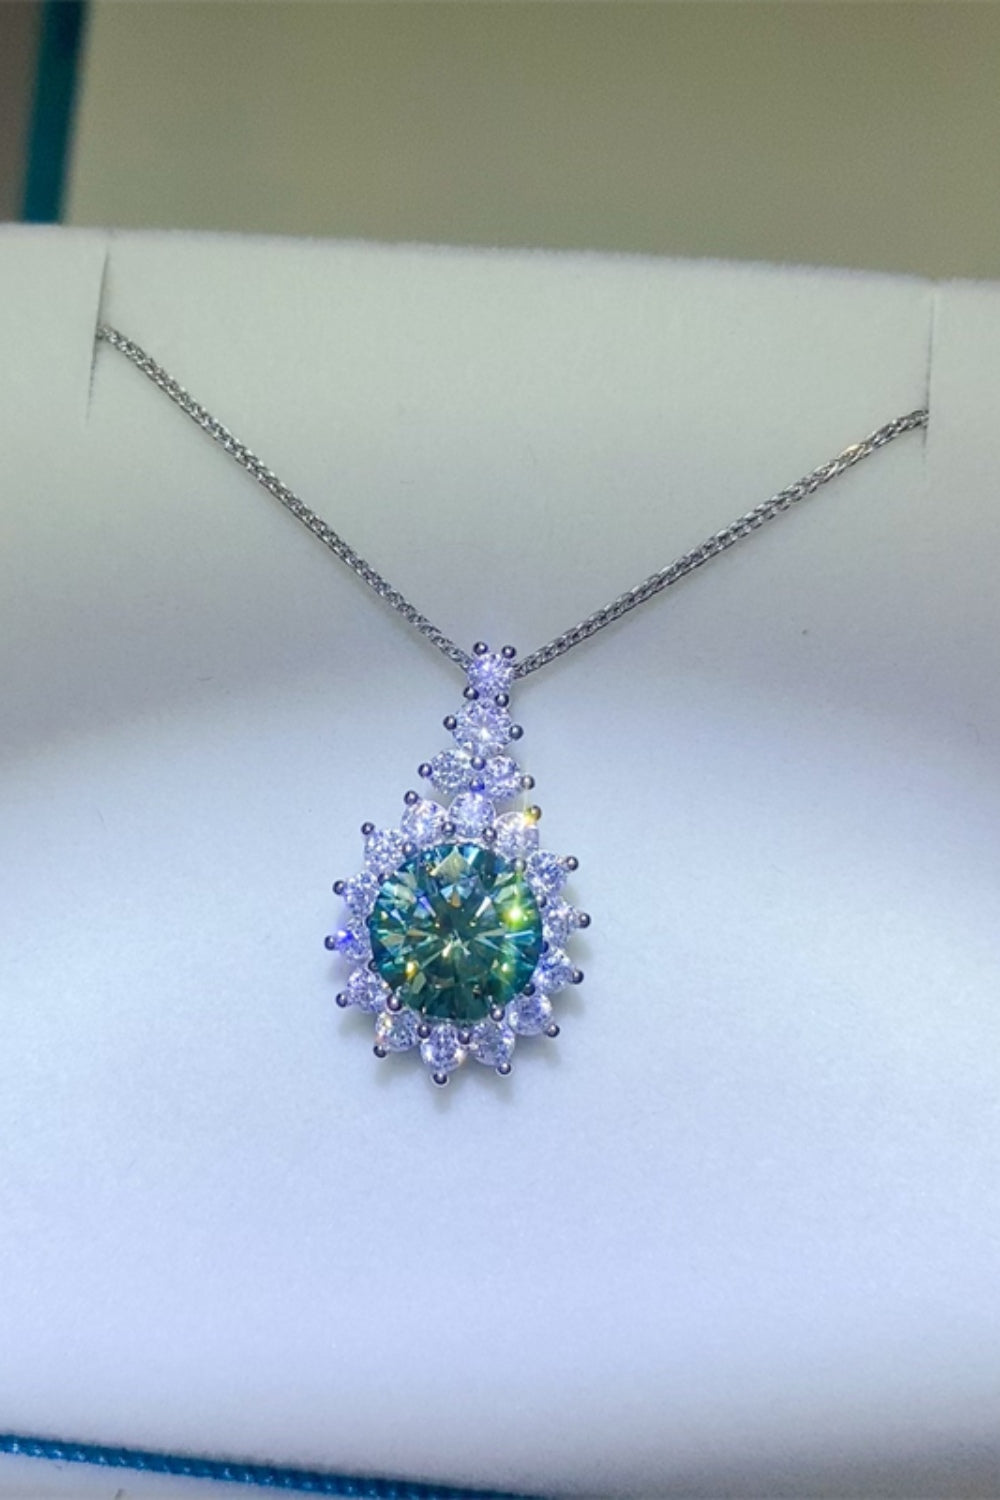 3 Carat Moissanite 925 Sterling Silver Pendant Necklace - Crazy Like a Daisy Boutique #